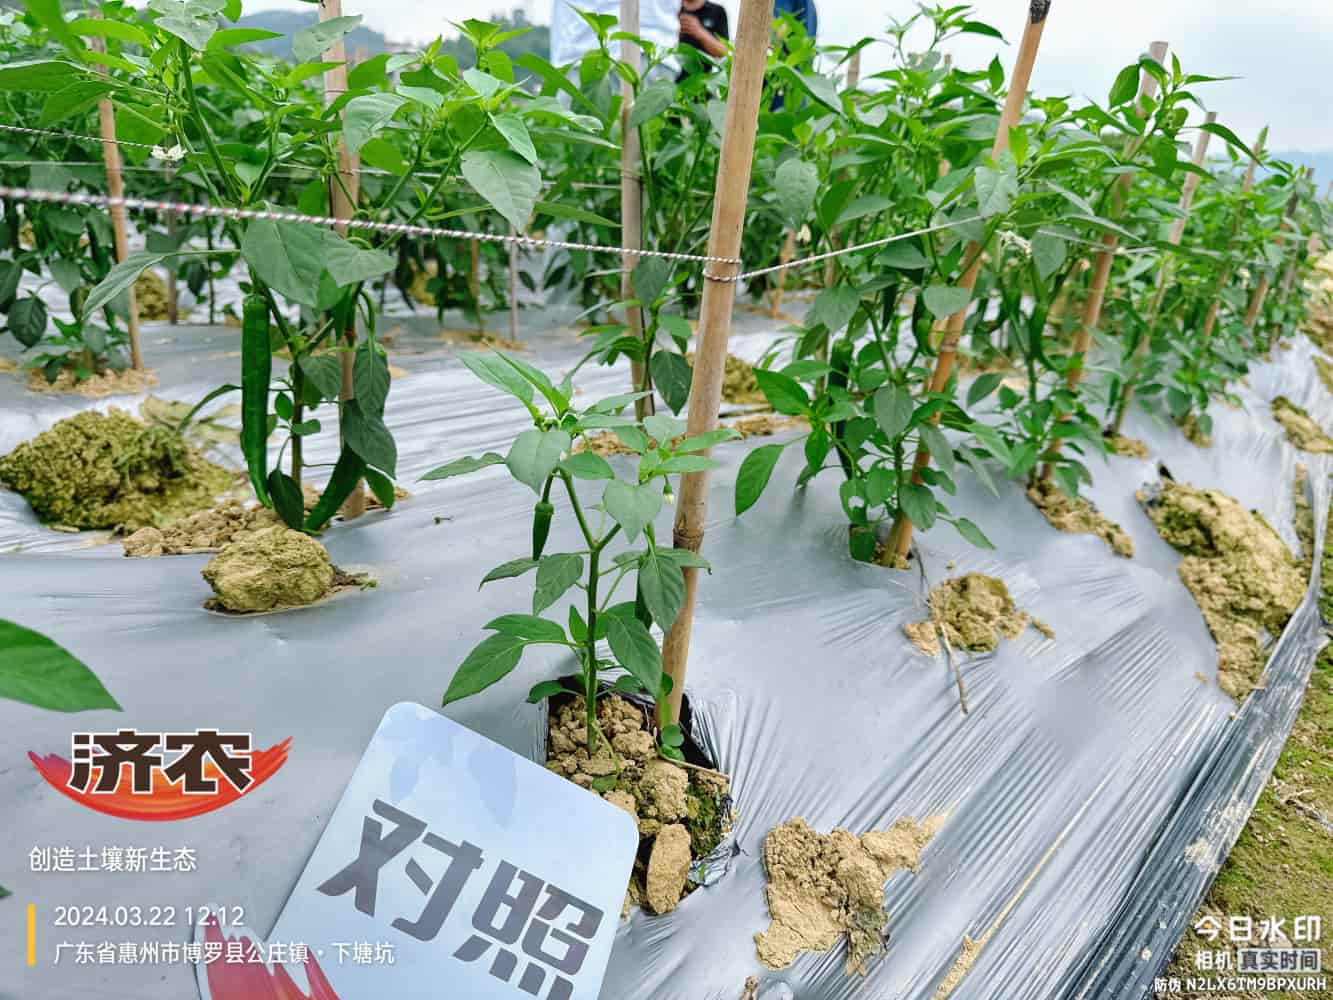 The effect of using agricultural products in Guangdong chili peppers(图2)